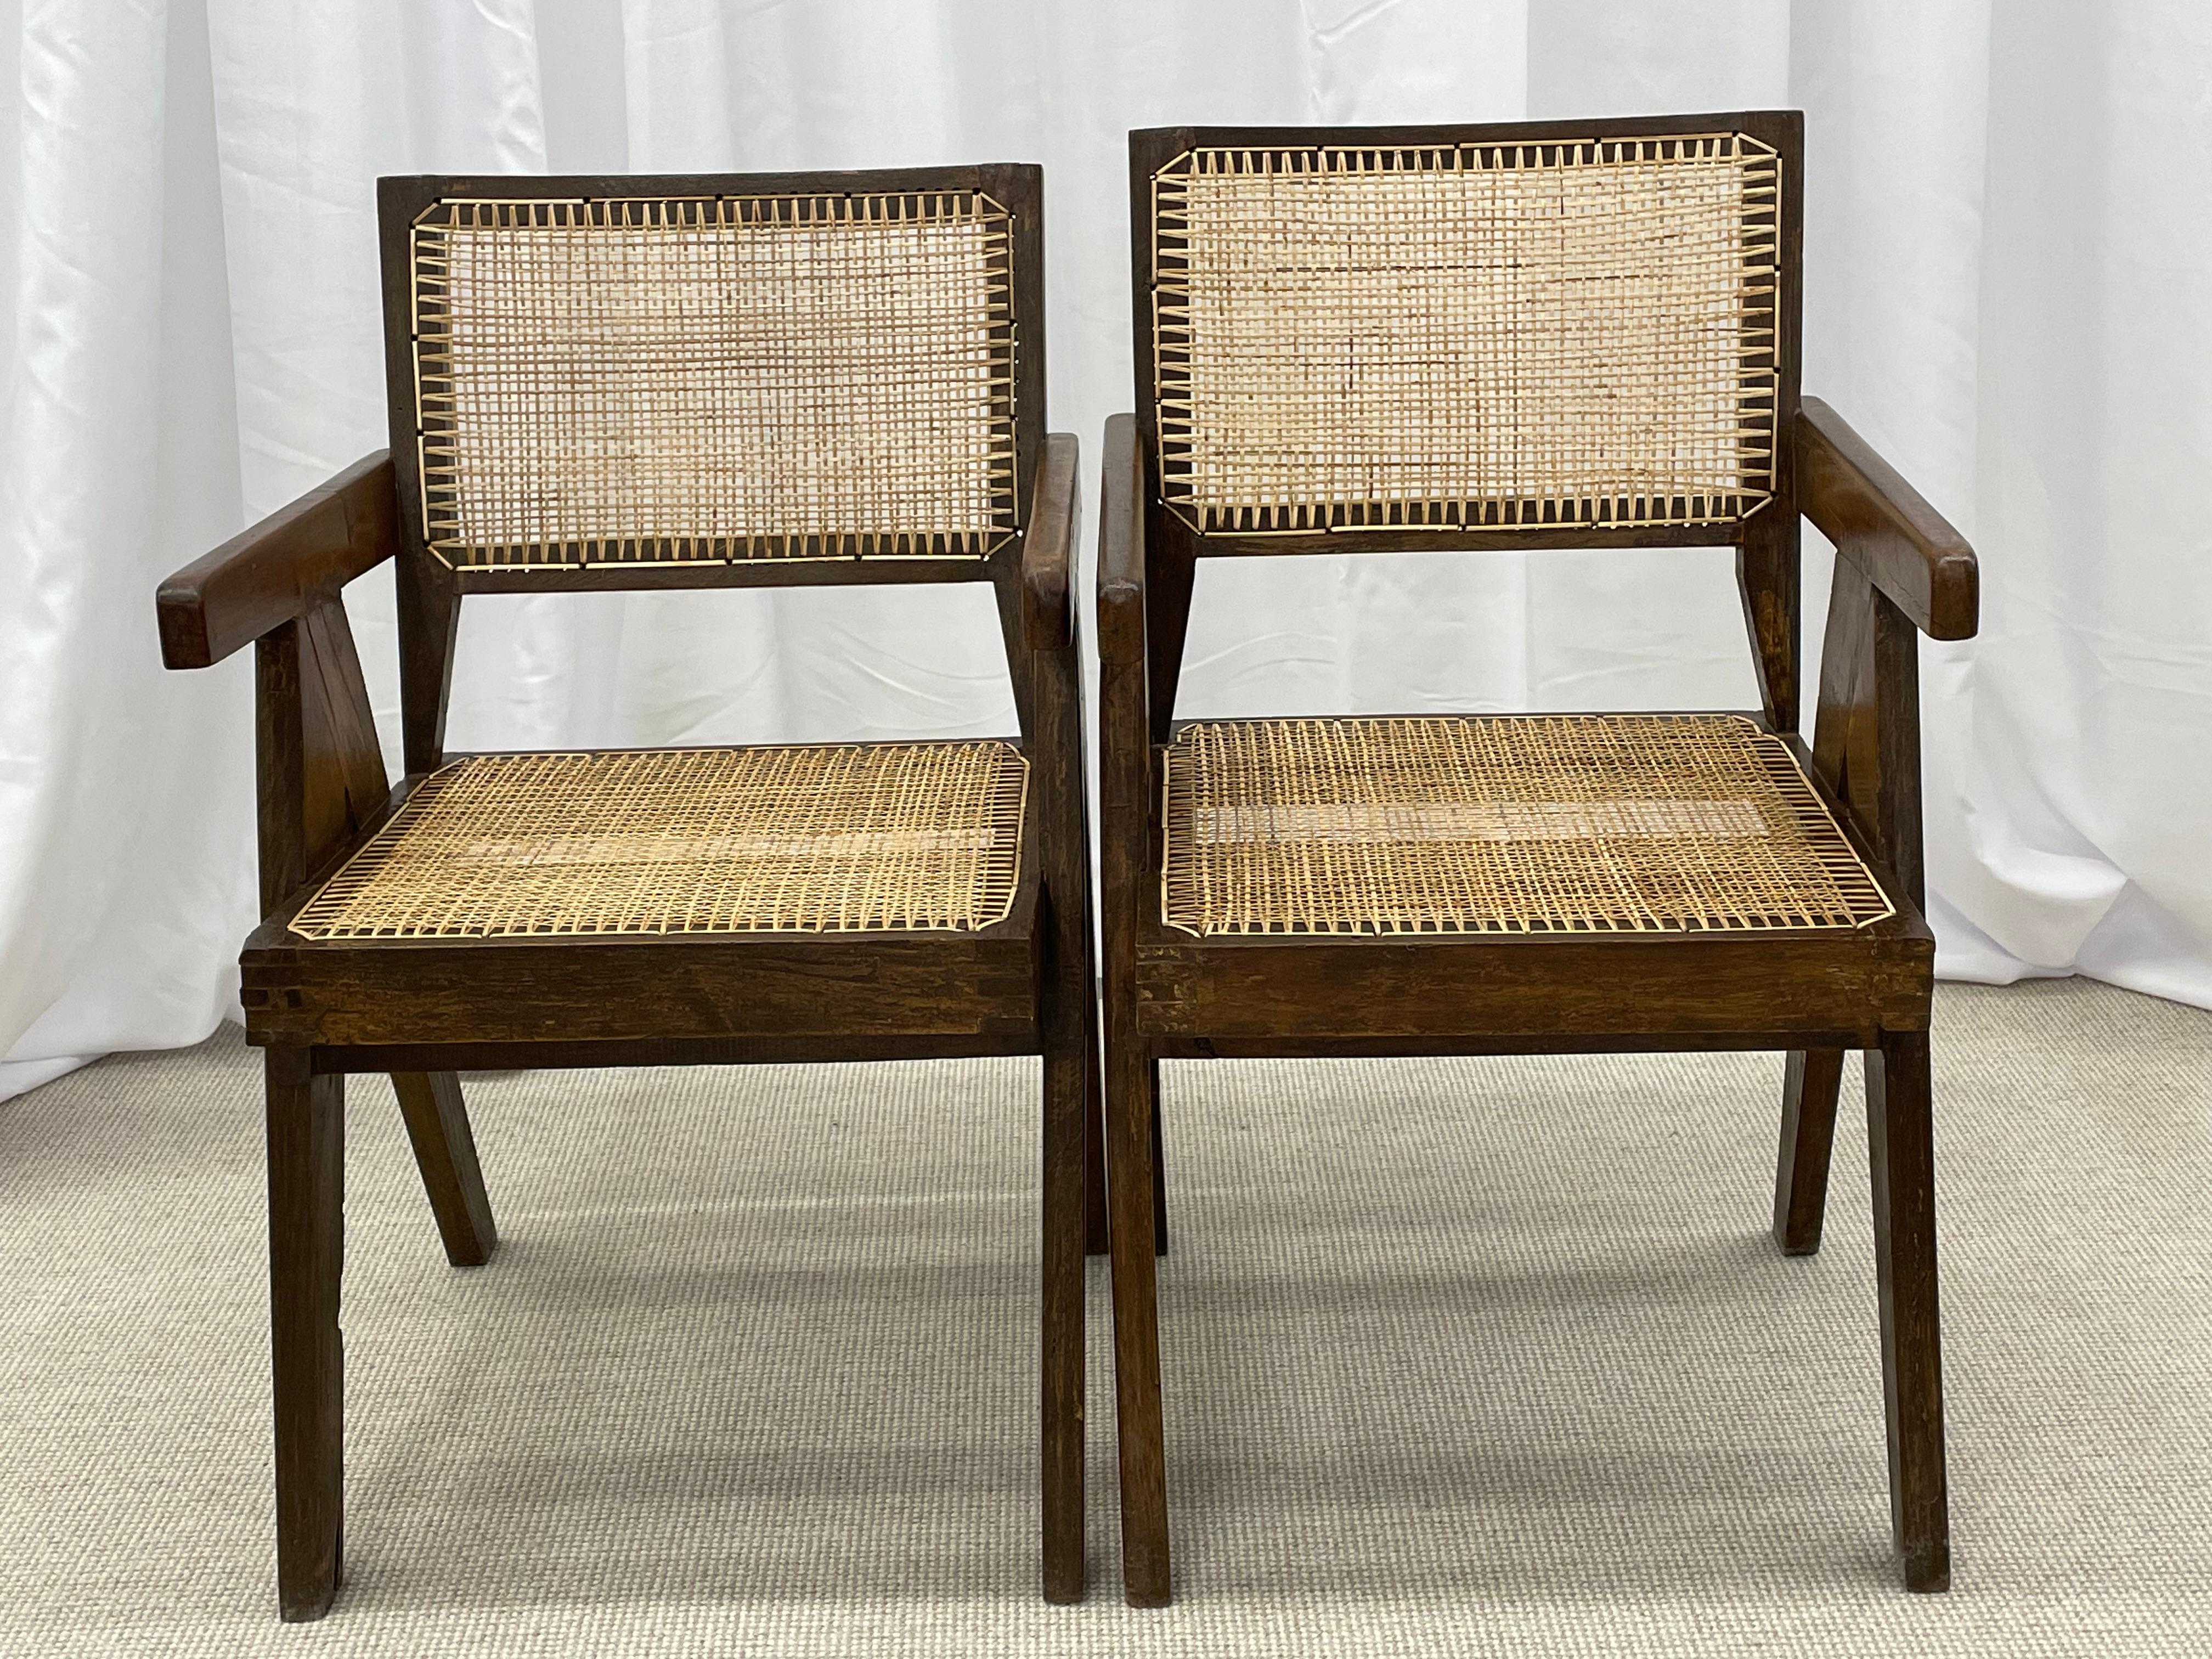 Cane Pair of Mid-Century Modern Pierre Jeanneret Office Chairs, Authentic